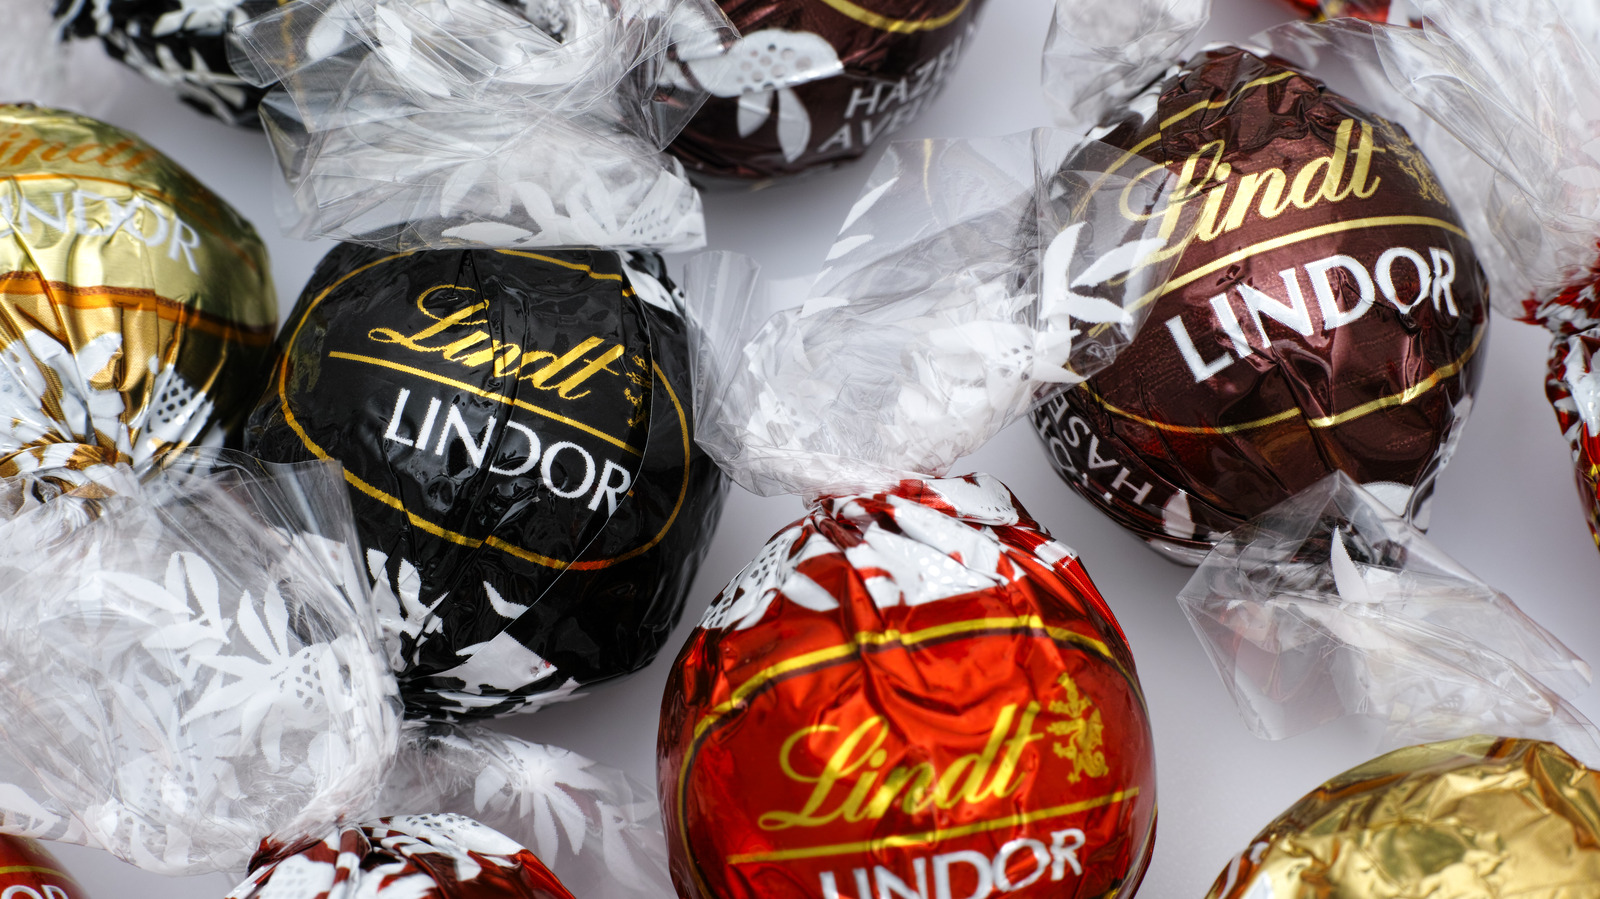 We're Calling It Early Lindor Truffle's Super Bowl 2024 Ad Is The